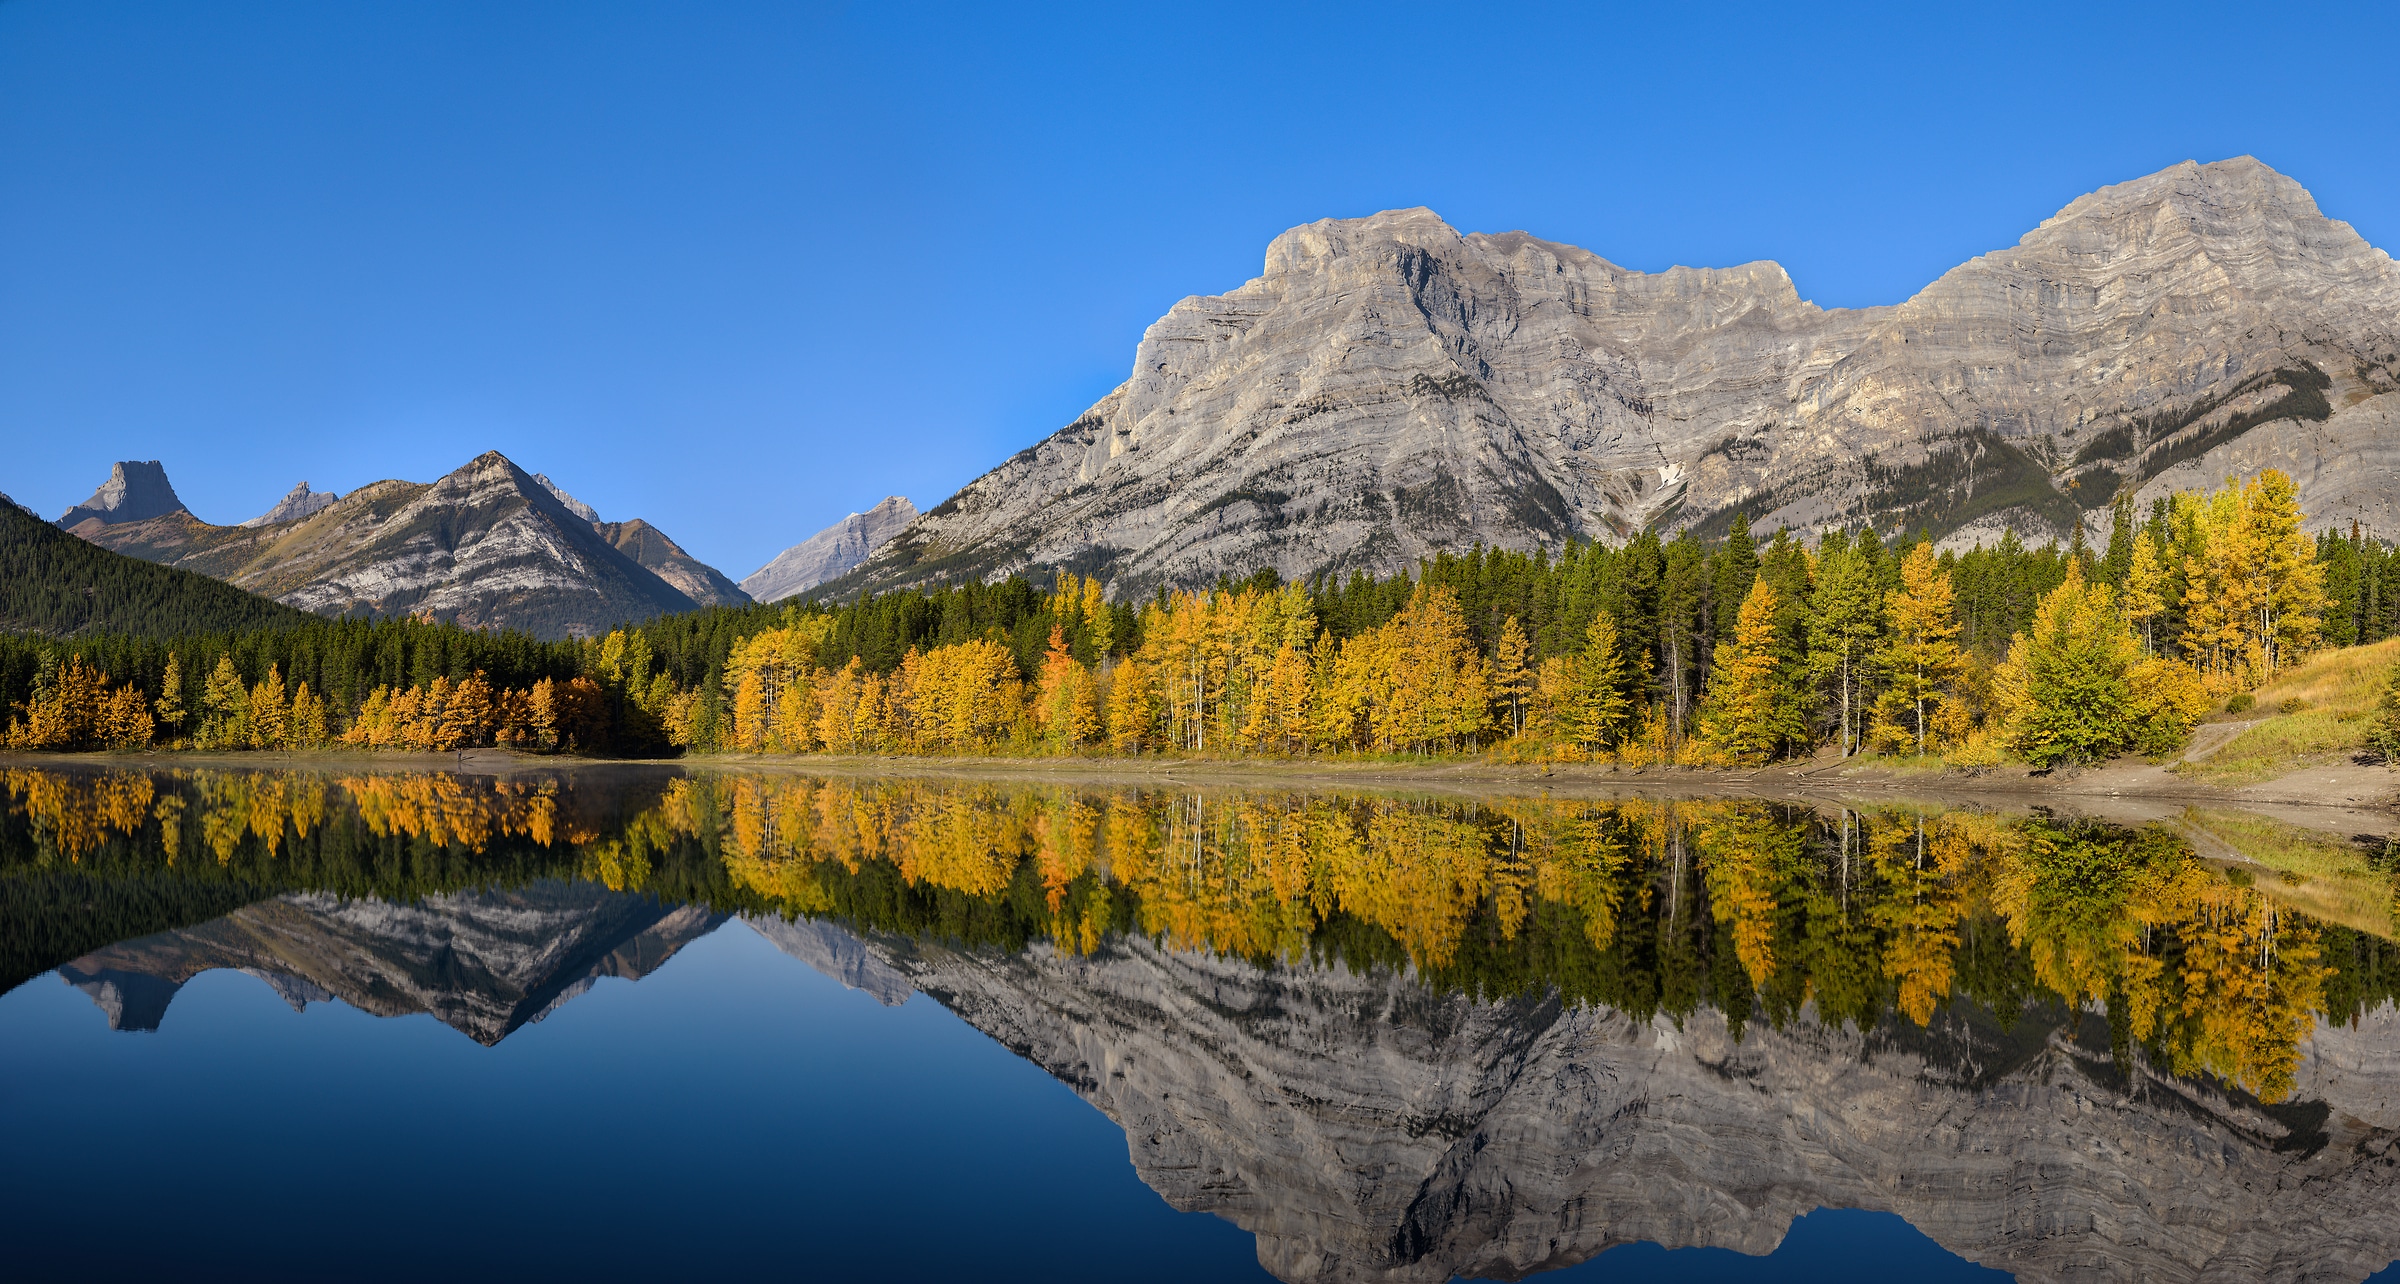 2,018 megapixels! A very high resolution, large-format VAST photo print of an autumn morning at a lake with a perfect reflection of mountains and a blue sky; landscape photograph created by Scott Dimond in Wedge Pond, Kananaskis Country, Alberta, Canada.